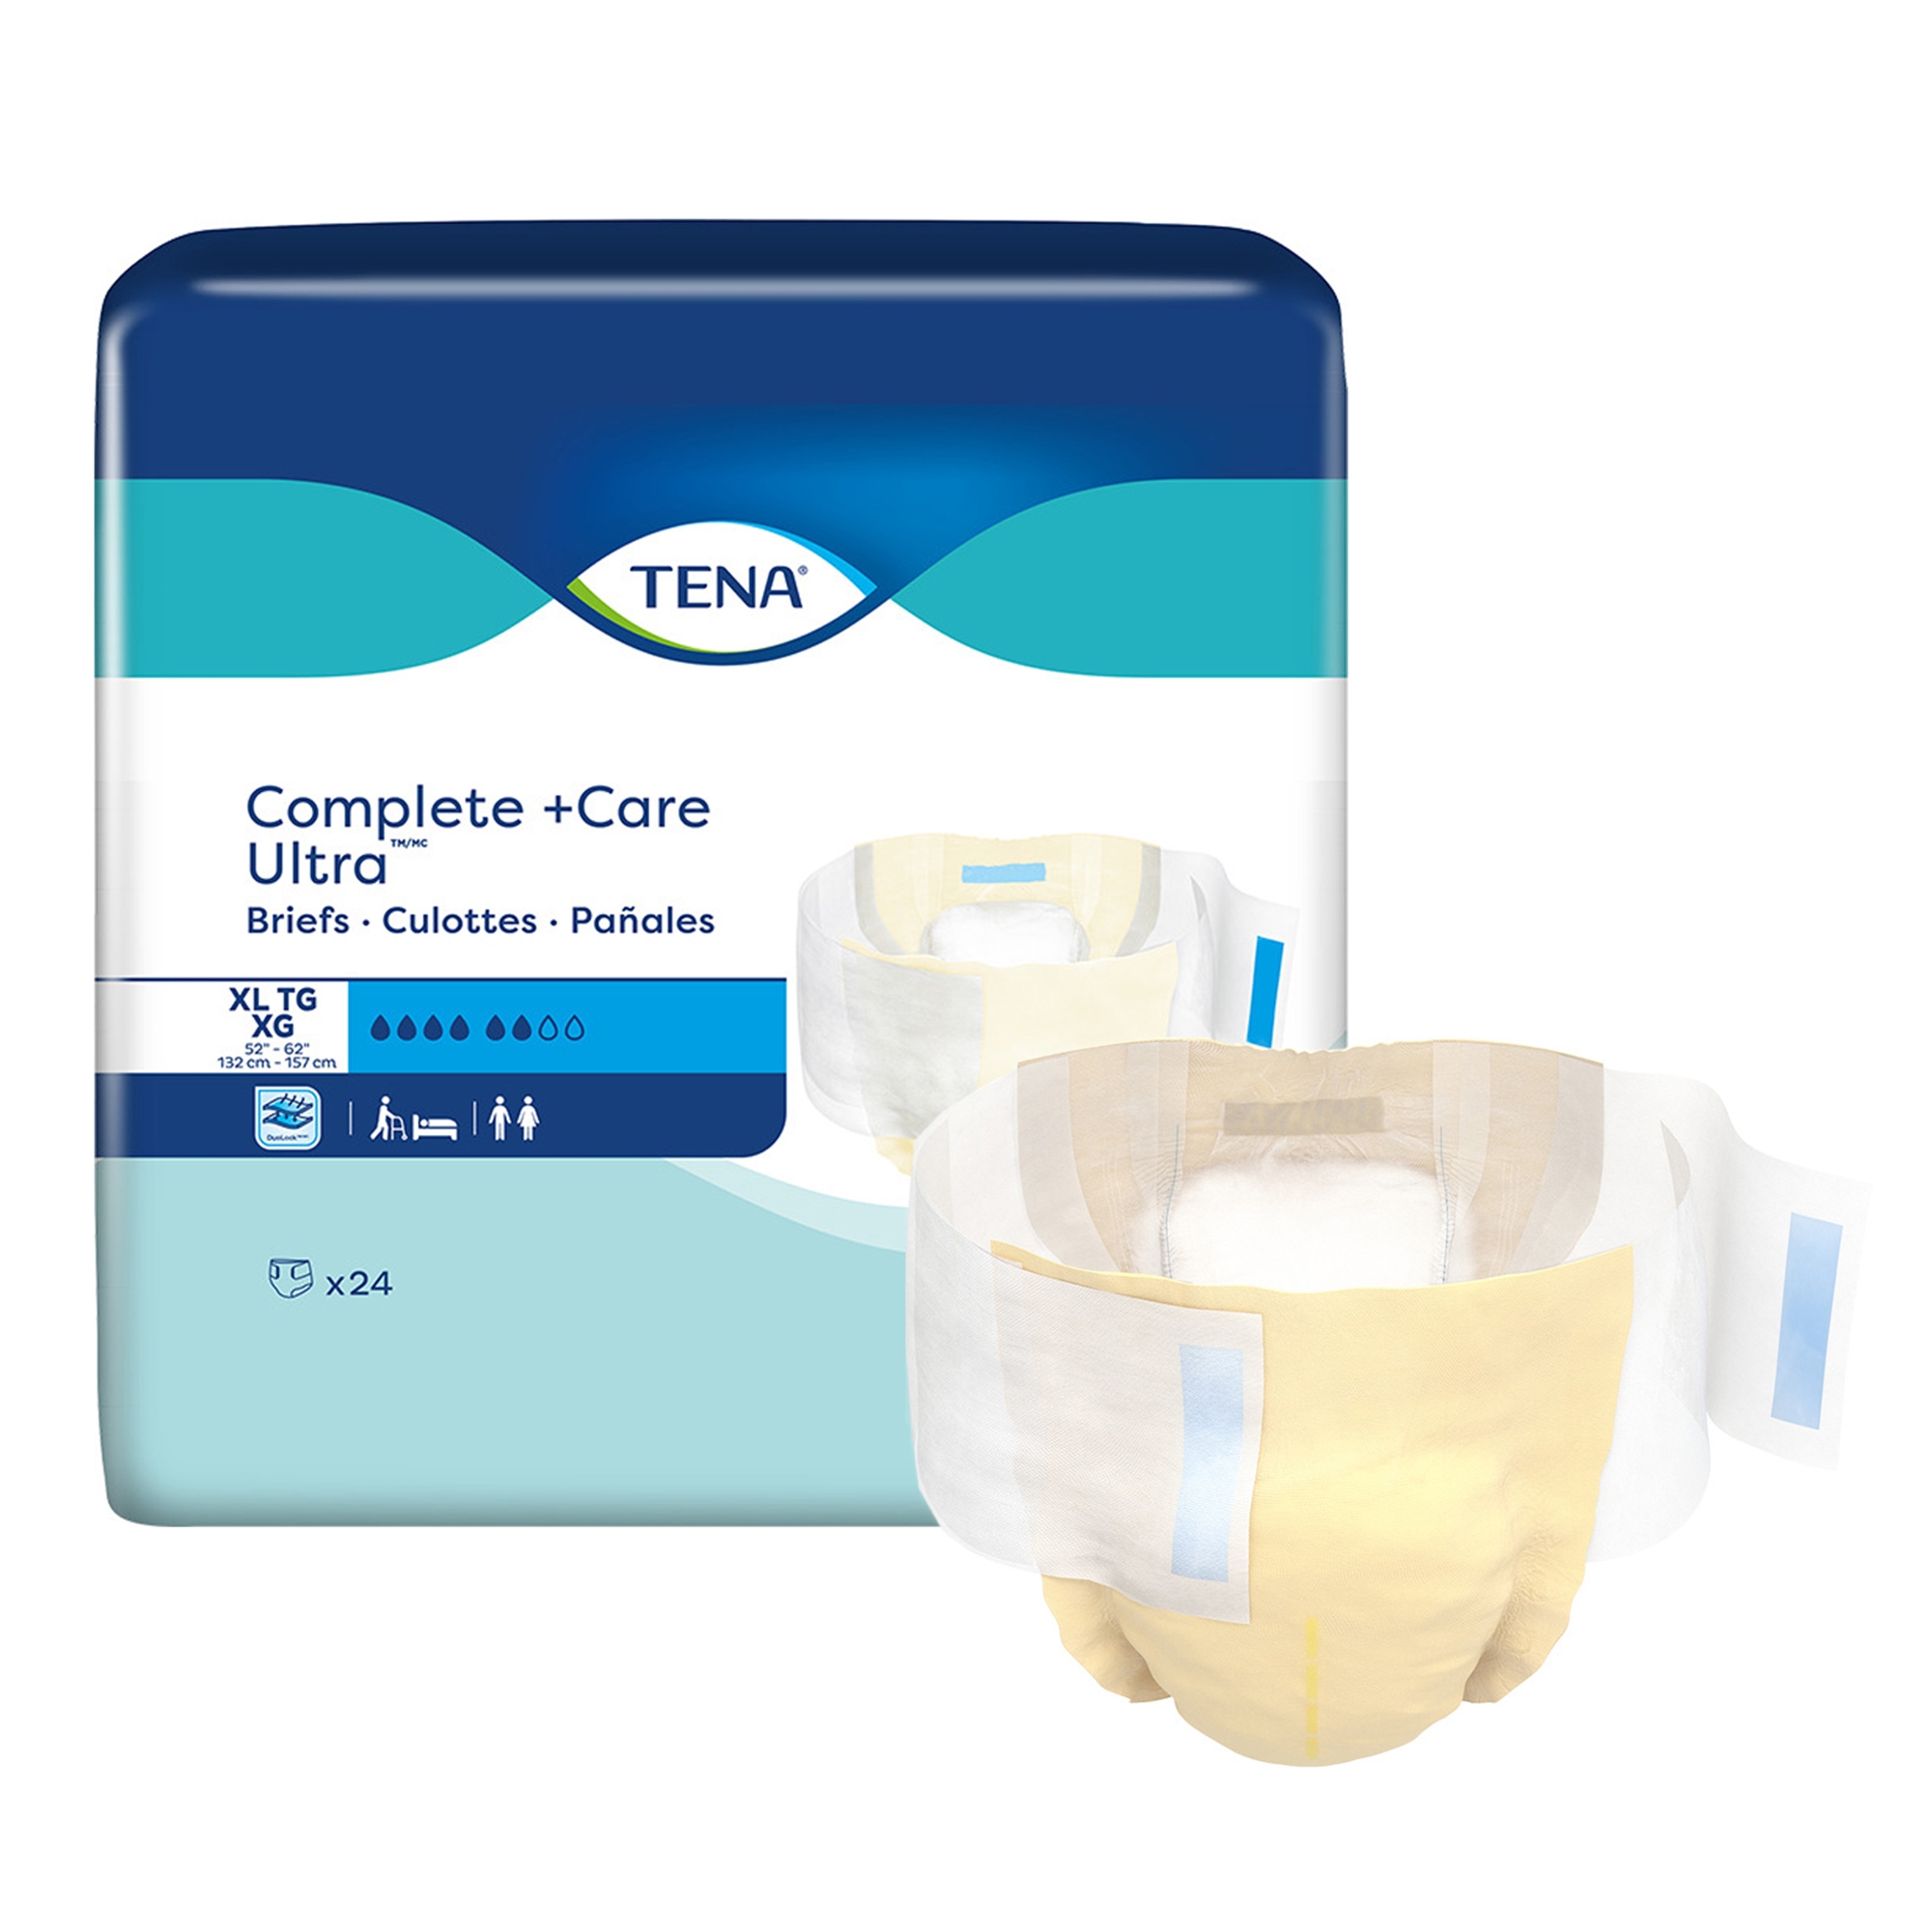 TENA Complete + Care Ultra Incontinence Briefs, Moderate Absorbency -  Unisex Adult Diapers, Disposable, XL